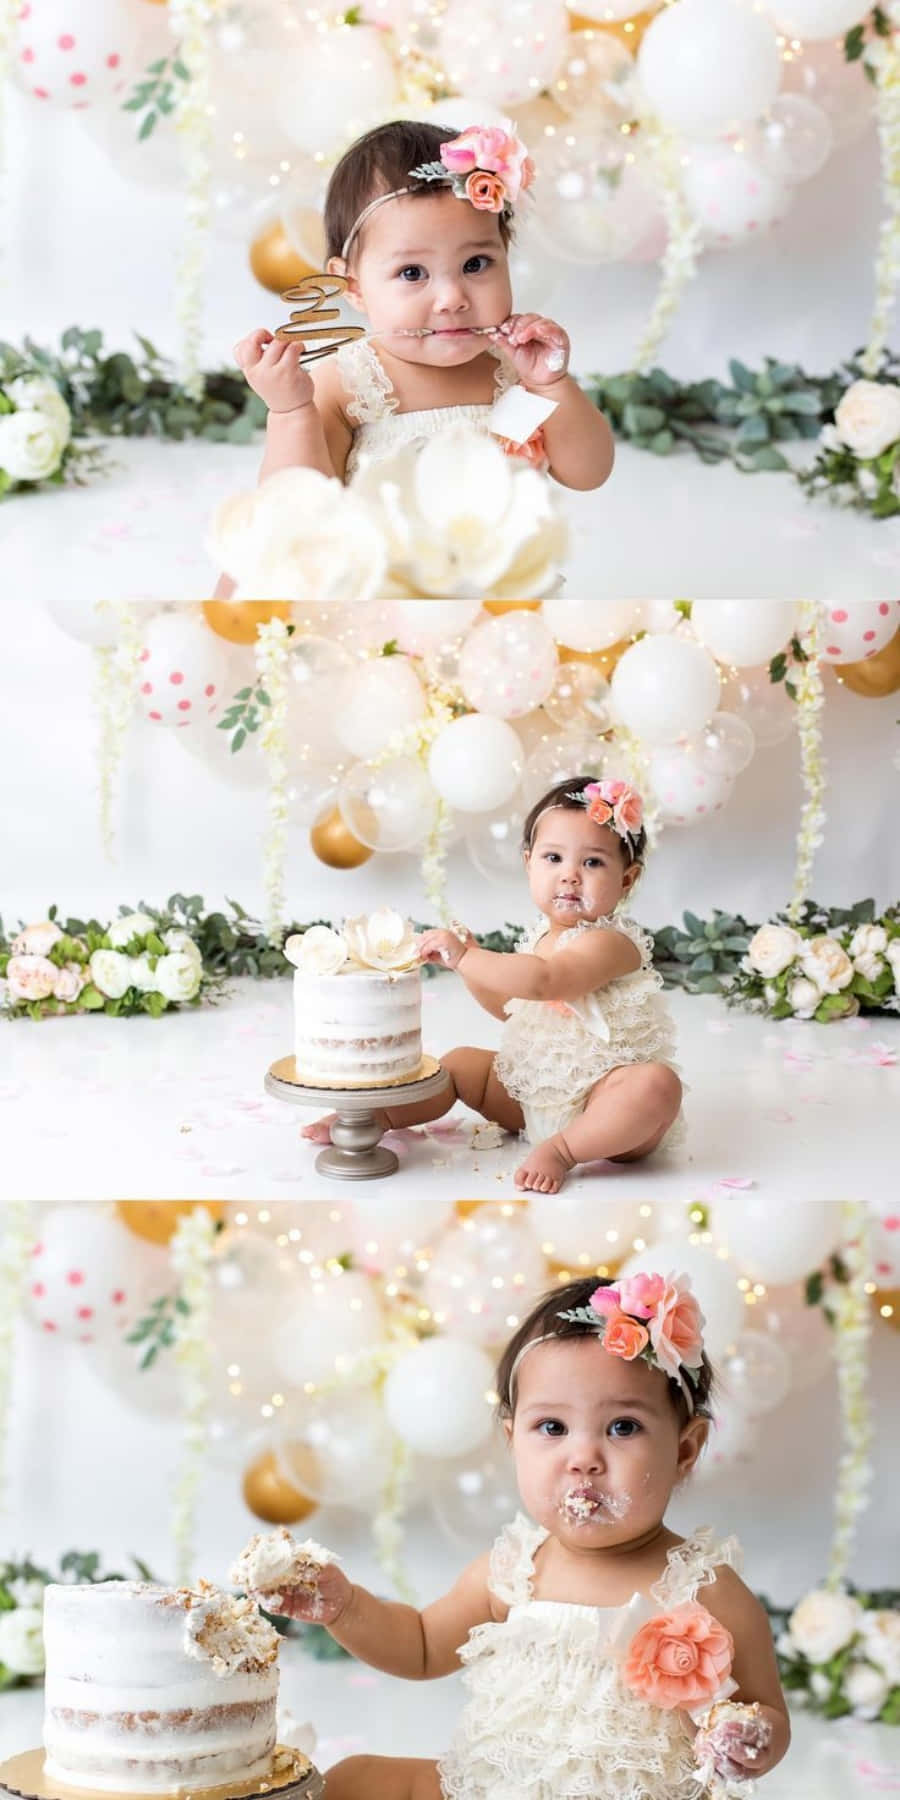 A Baby Girl Is Eating A Cake In Front Of Balloons